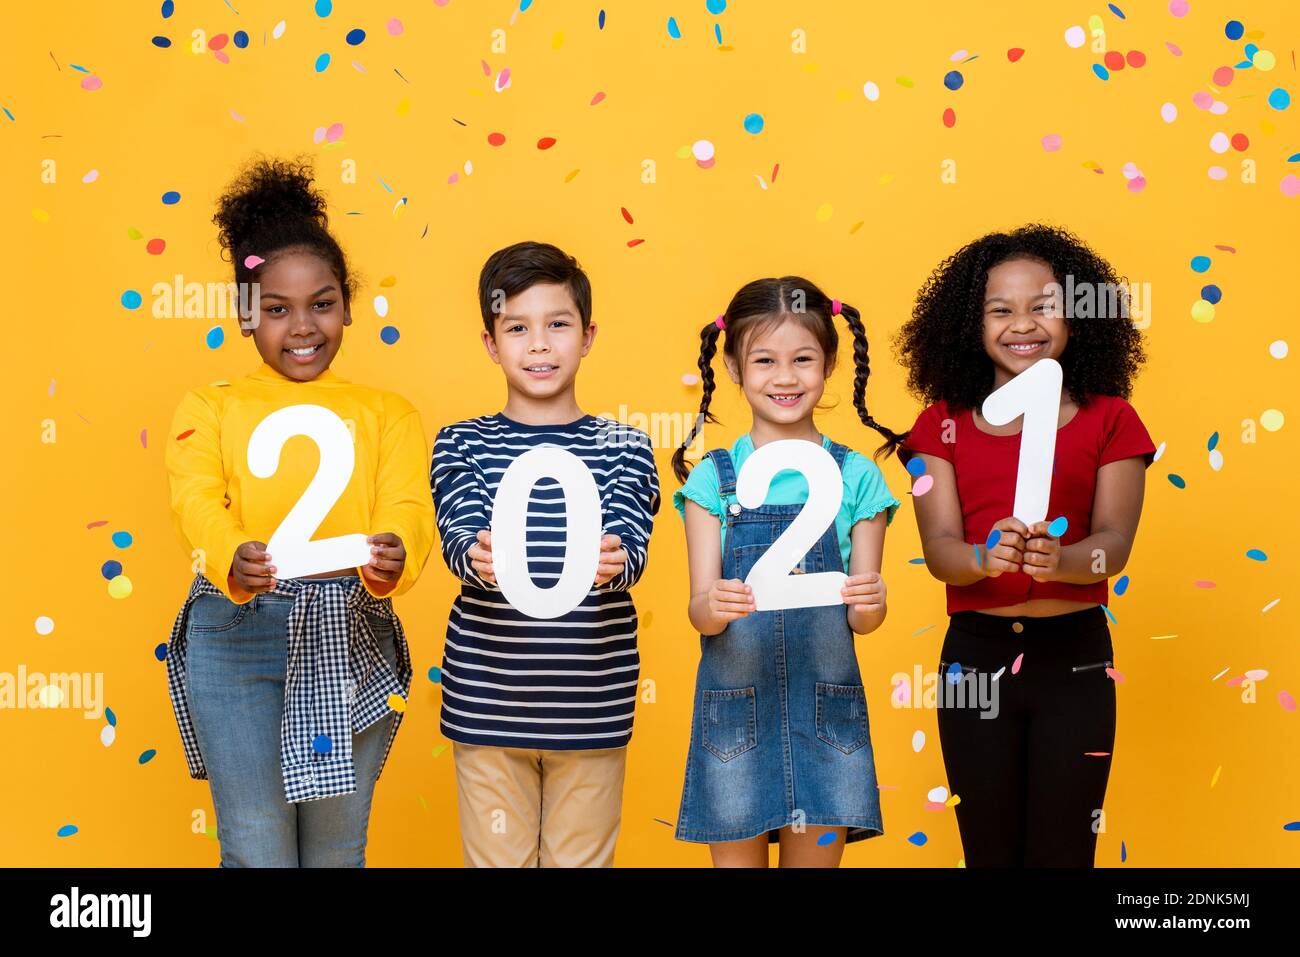 Cute smiling mixed race kids showing numbers 2021 celebrating new year isolated on yellow background Stock Photo